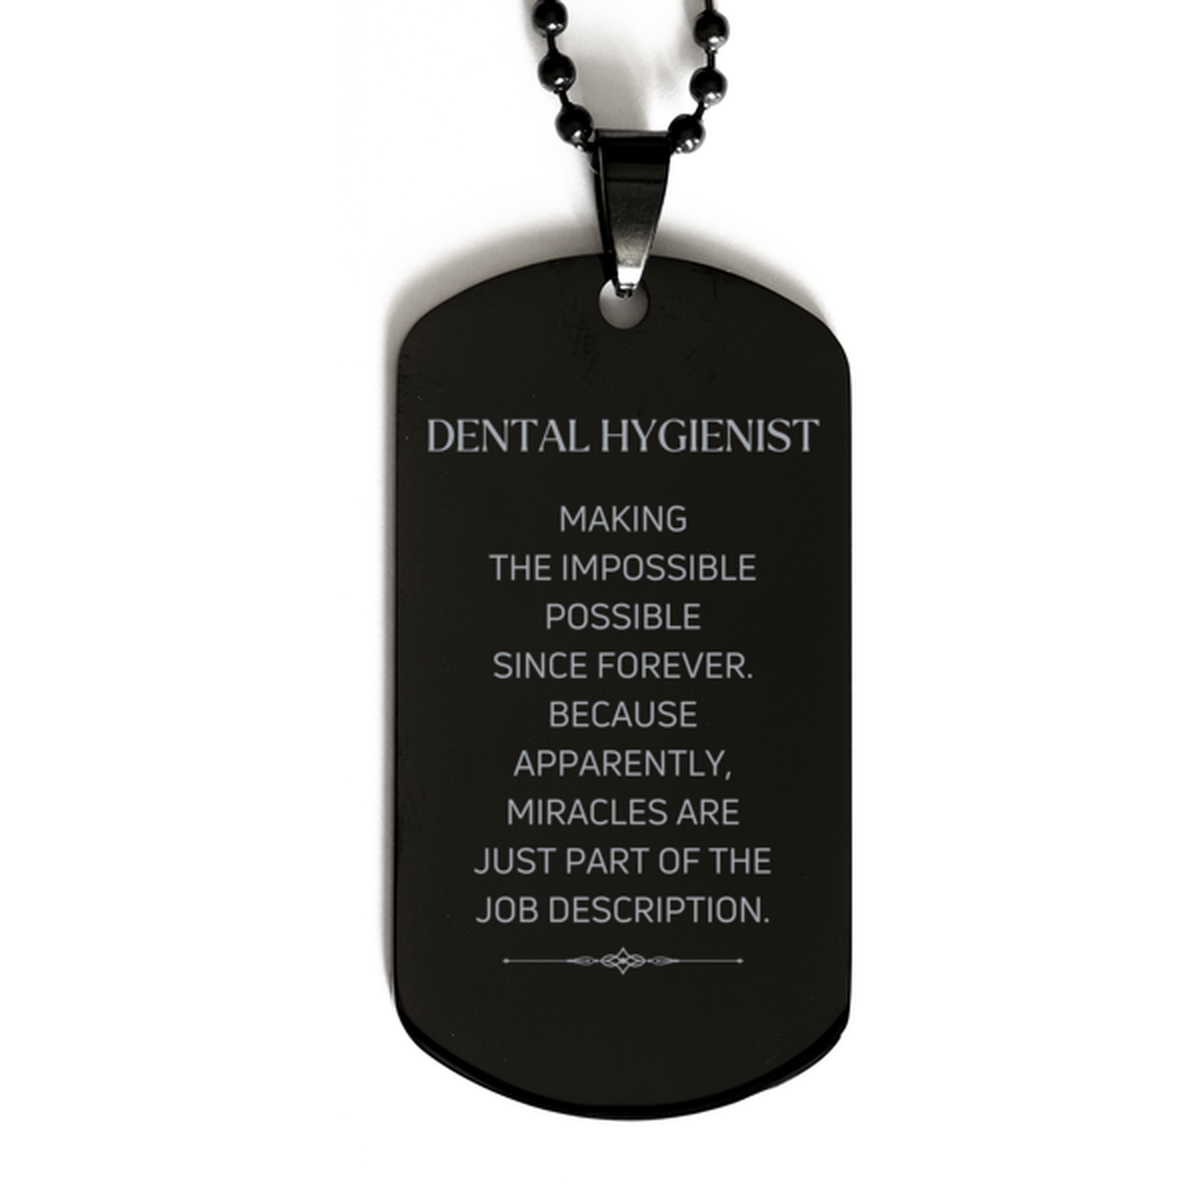 Funny Dental Hygienist Gifts, Miracles are just part of the job description, Inspirational Birthday Black Dog Tag For Dental Hygienist, Men, Women, Coworkers, Friends, Boss